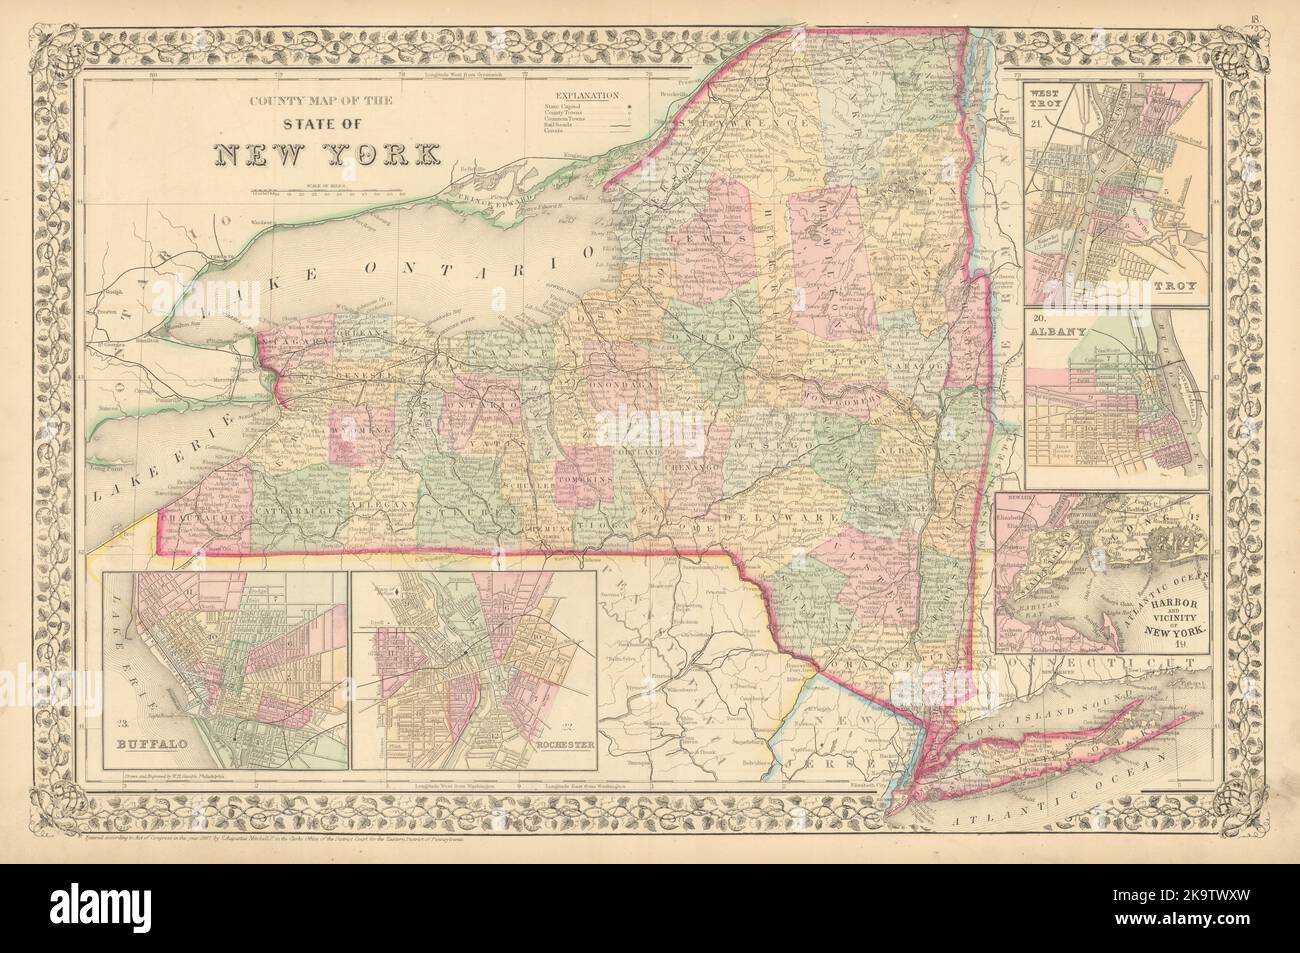 County map of the State of New York. Albany Troy Rochester Buffalo MITCHELL 1869 Stock Photo